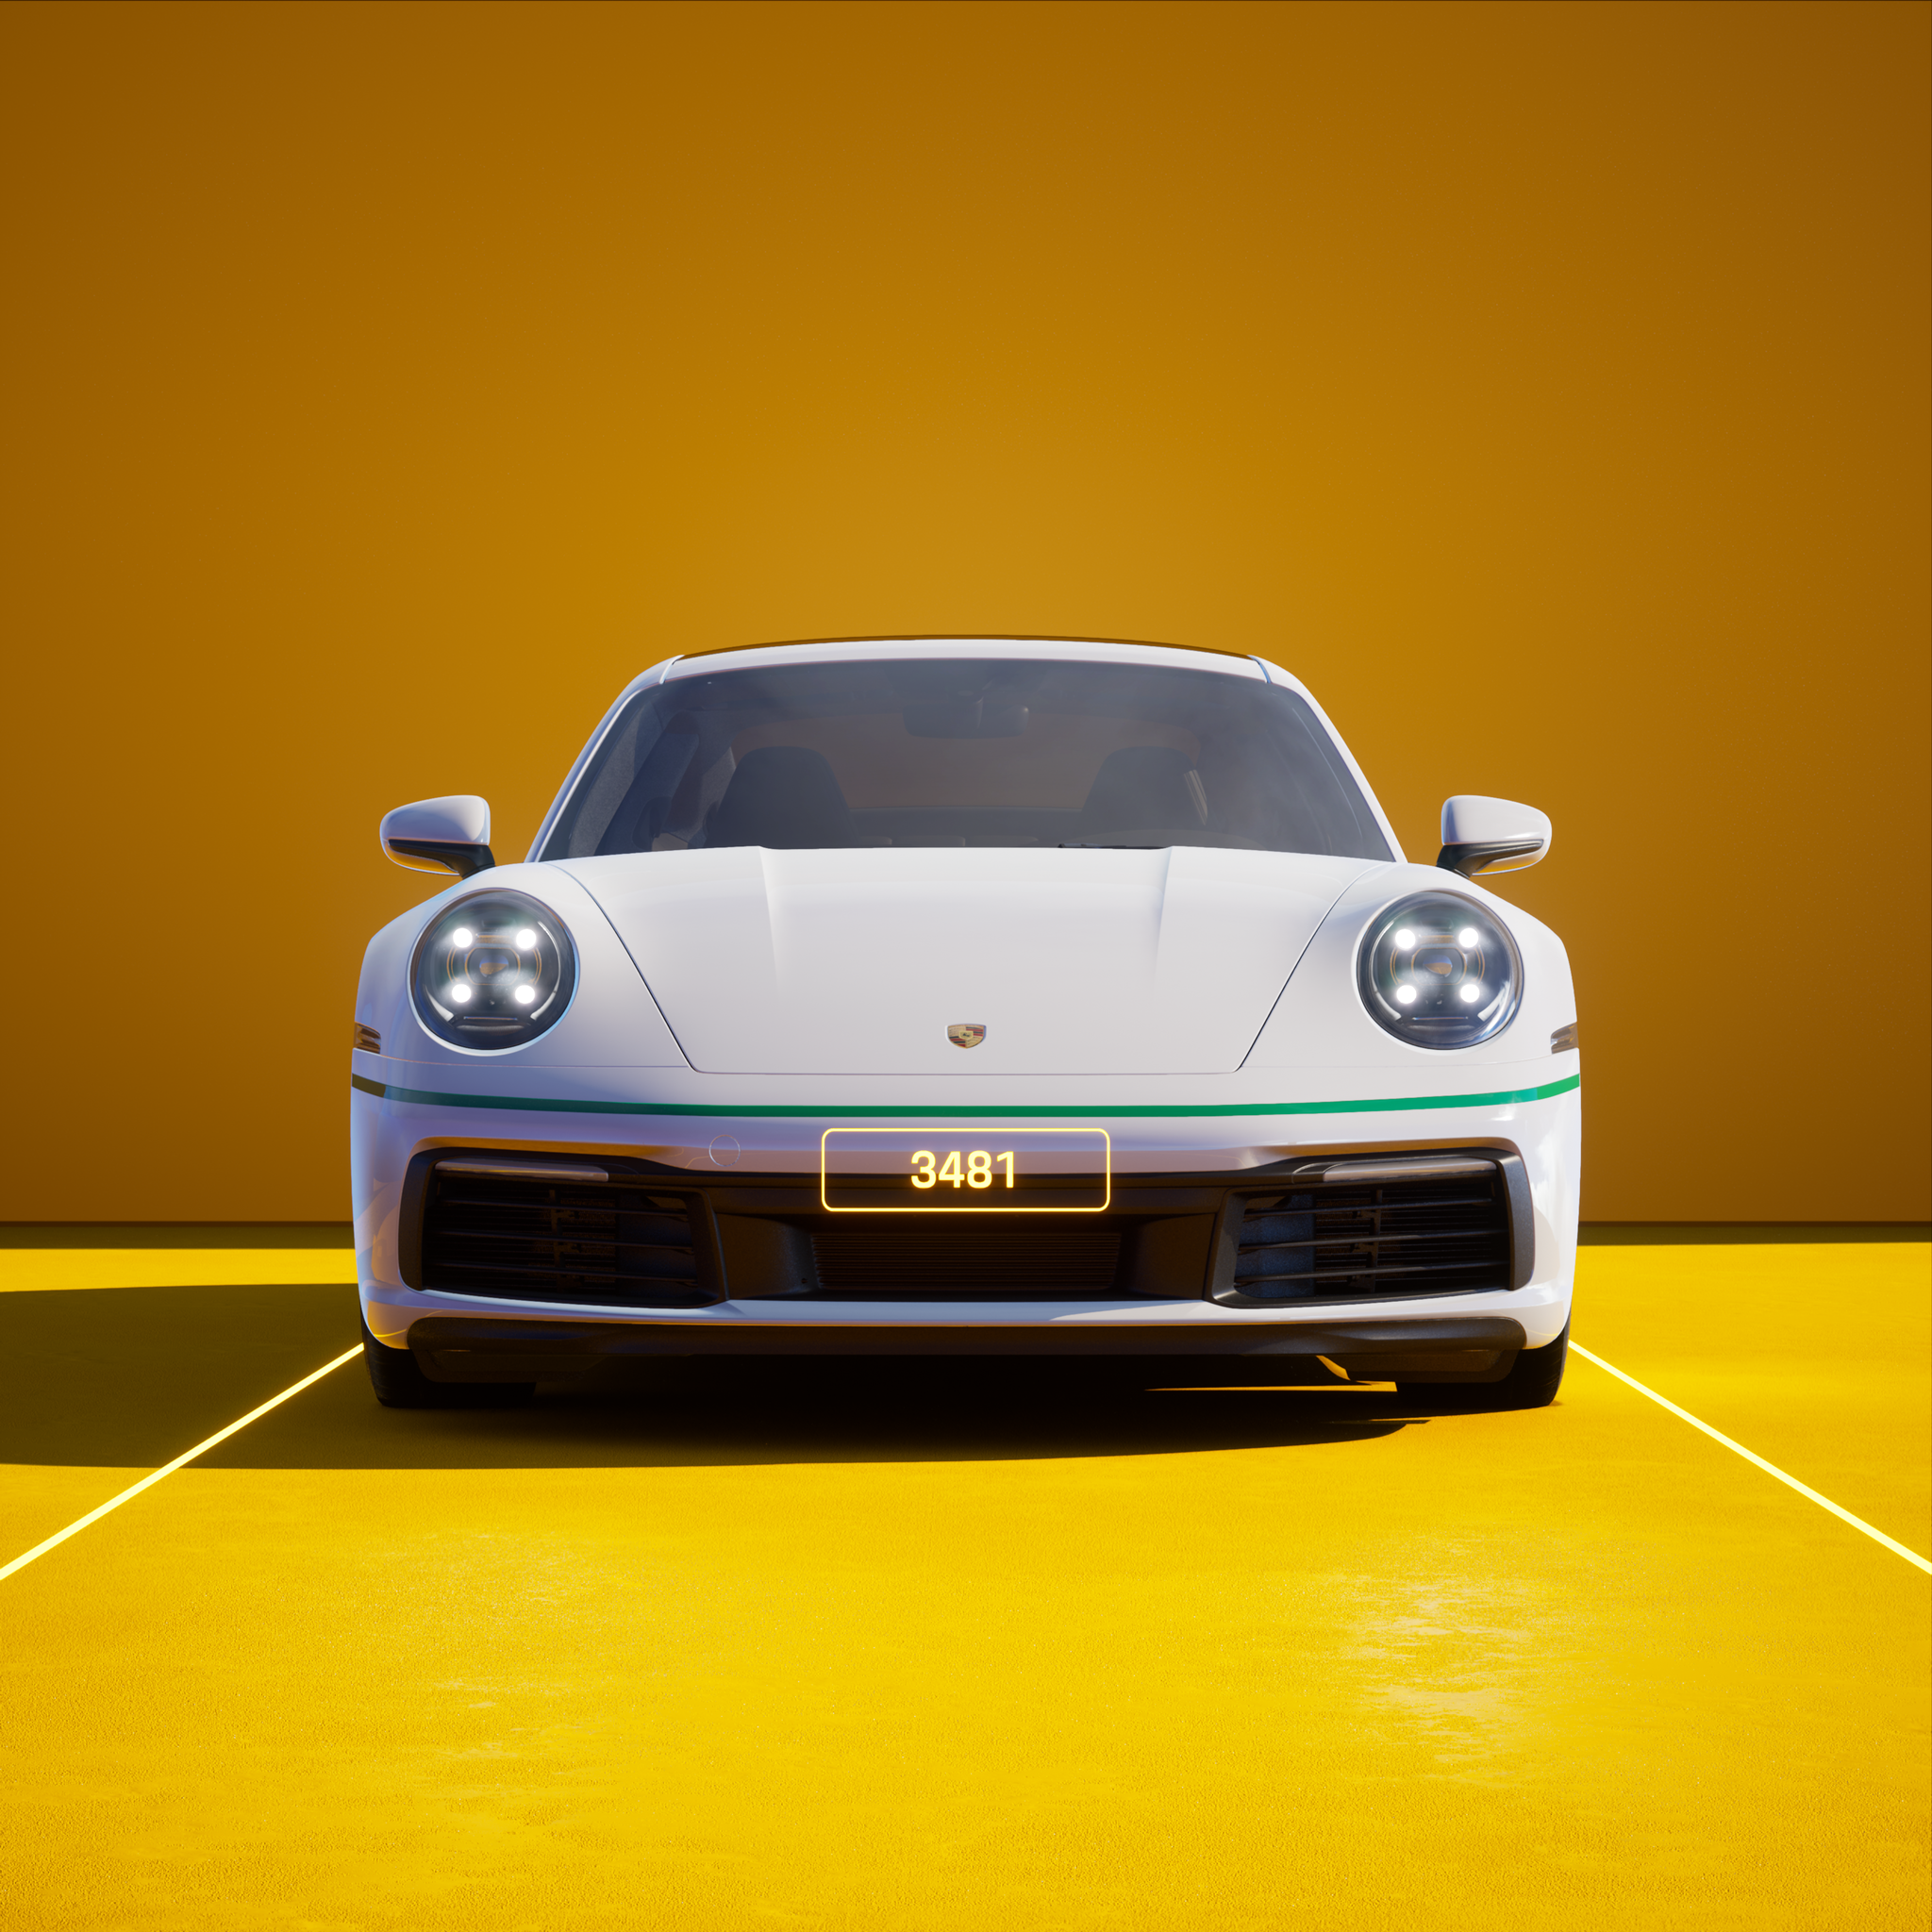 The PORSCHΞ 911 3481 image in phase